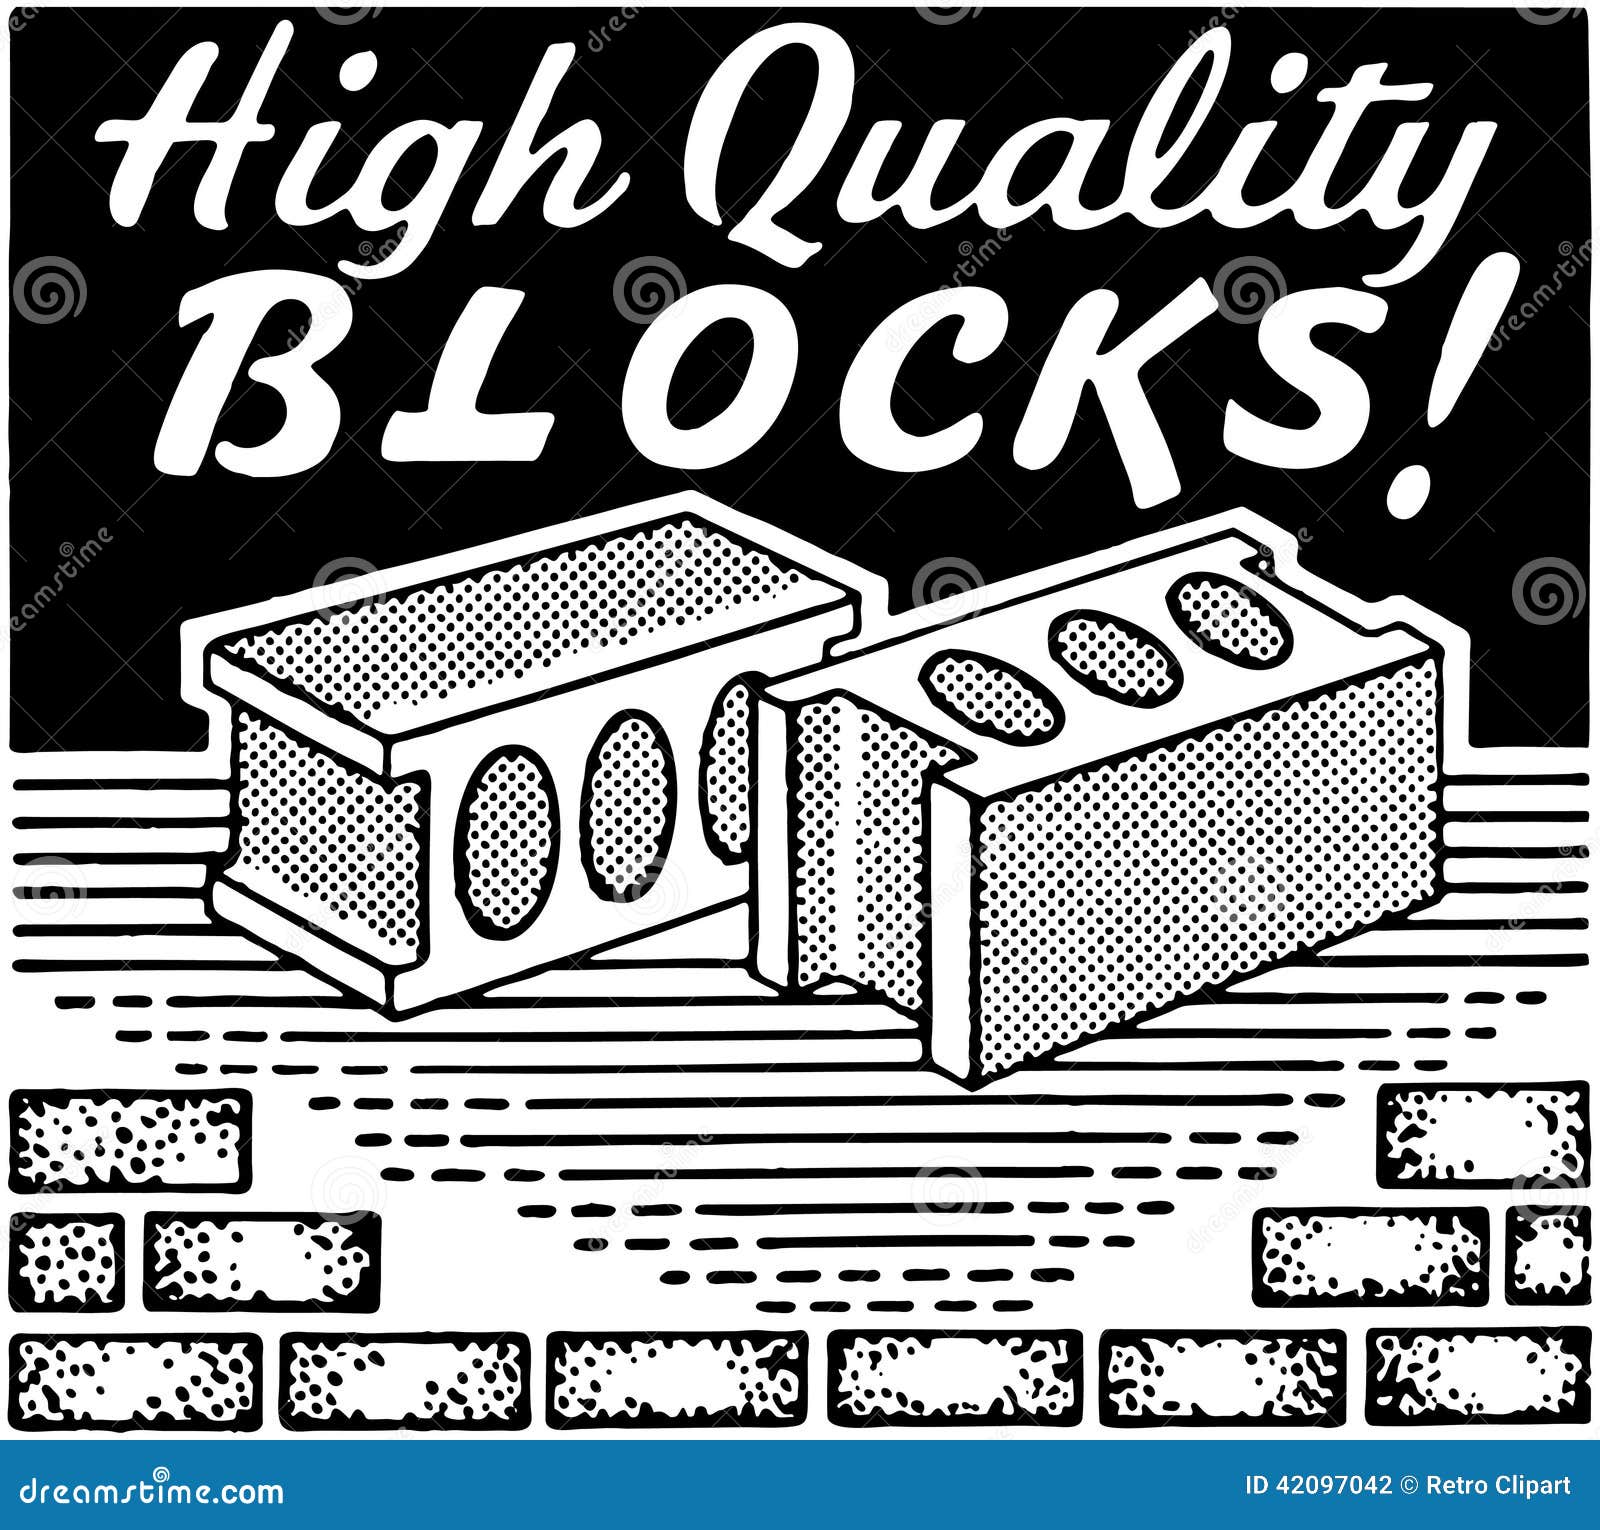 High Quality Blocks stock vector. Illustration of laborers - 42097042